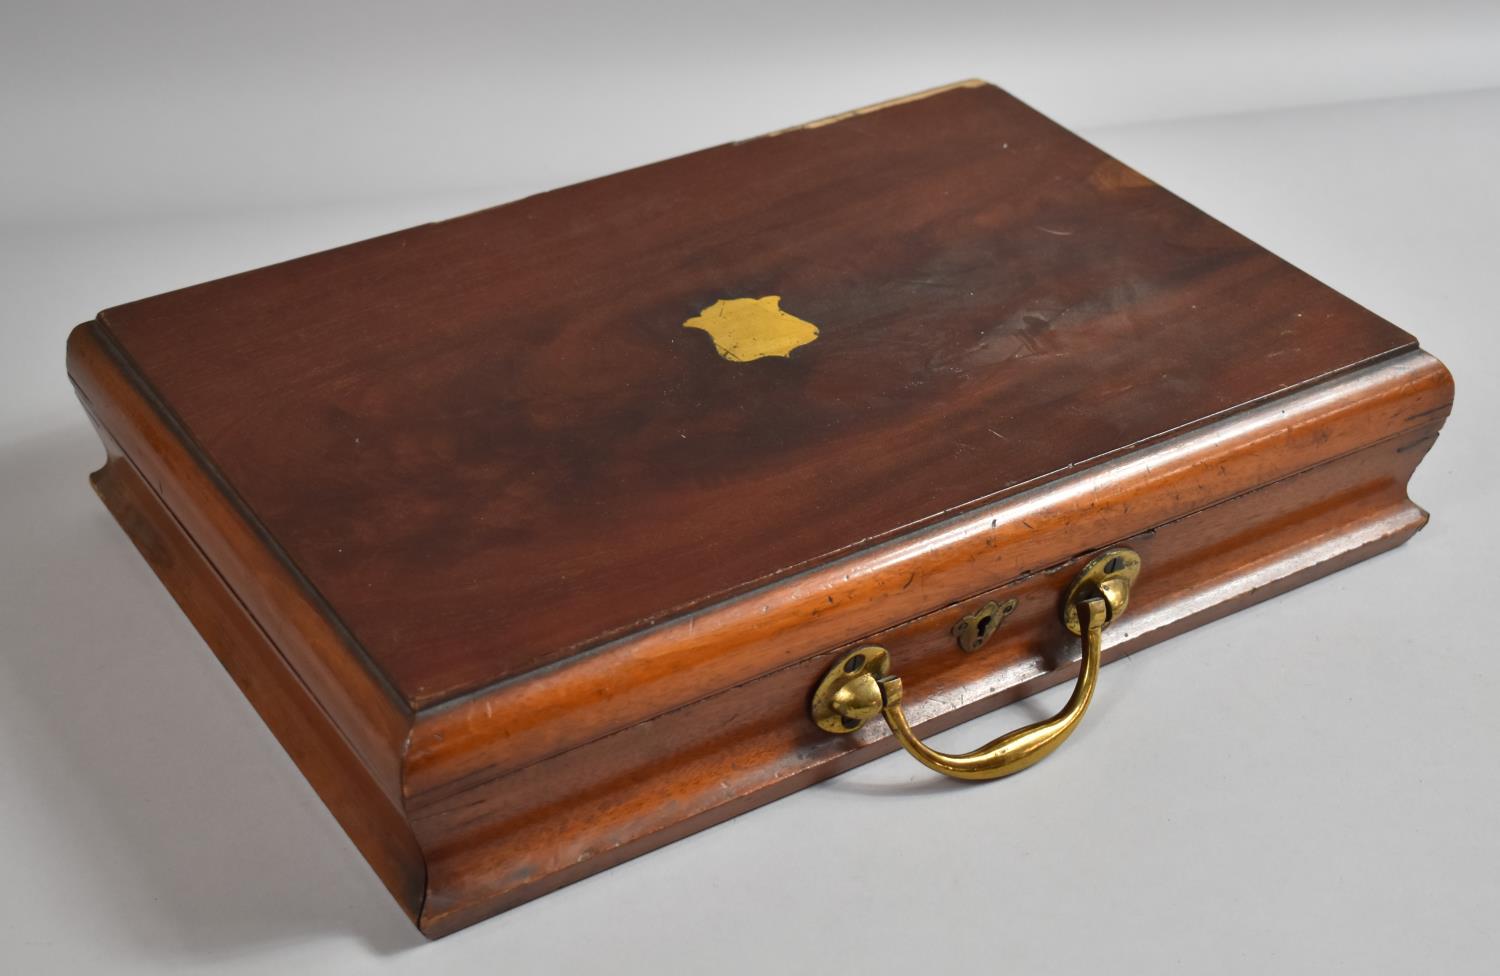 A Late Victorian/Edwardian Brass Mounted Canteen Box, Now Stripped Out to Create Workbox, Brass